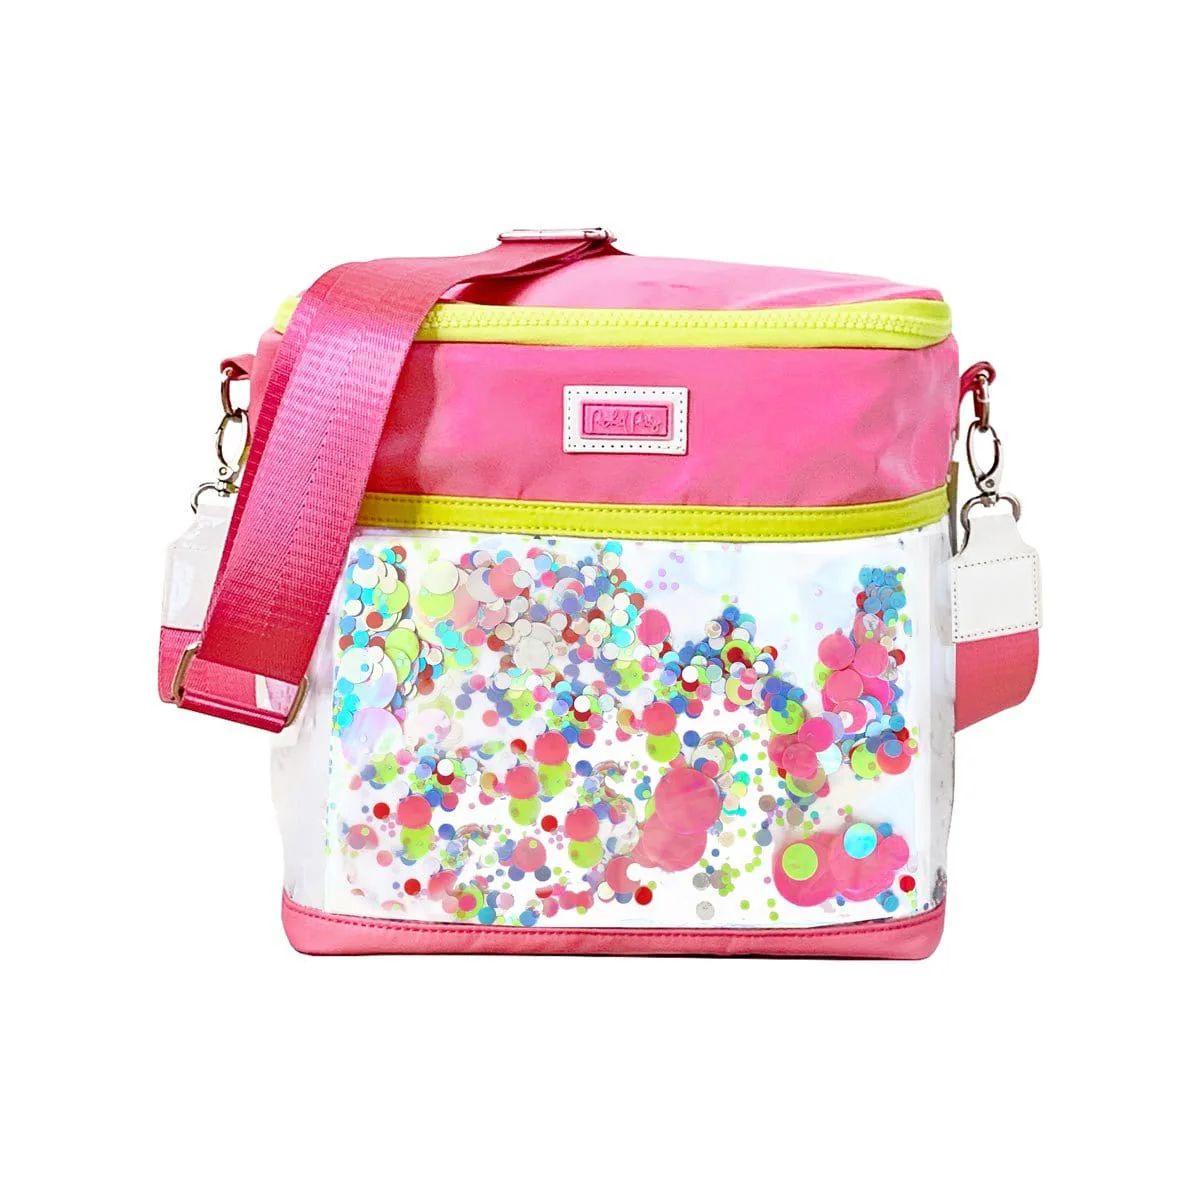 Take It Everywhere Cooler Bag | Packed Party